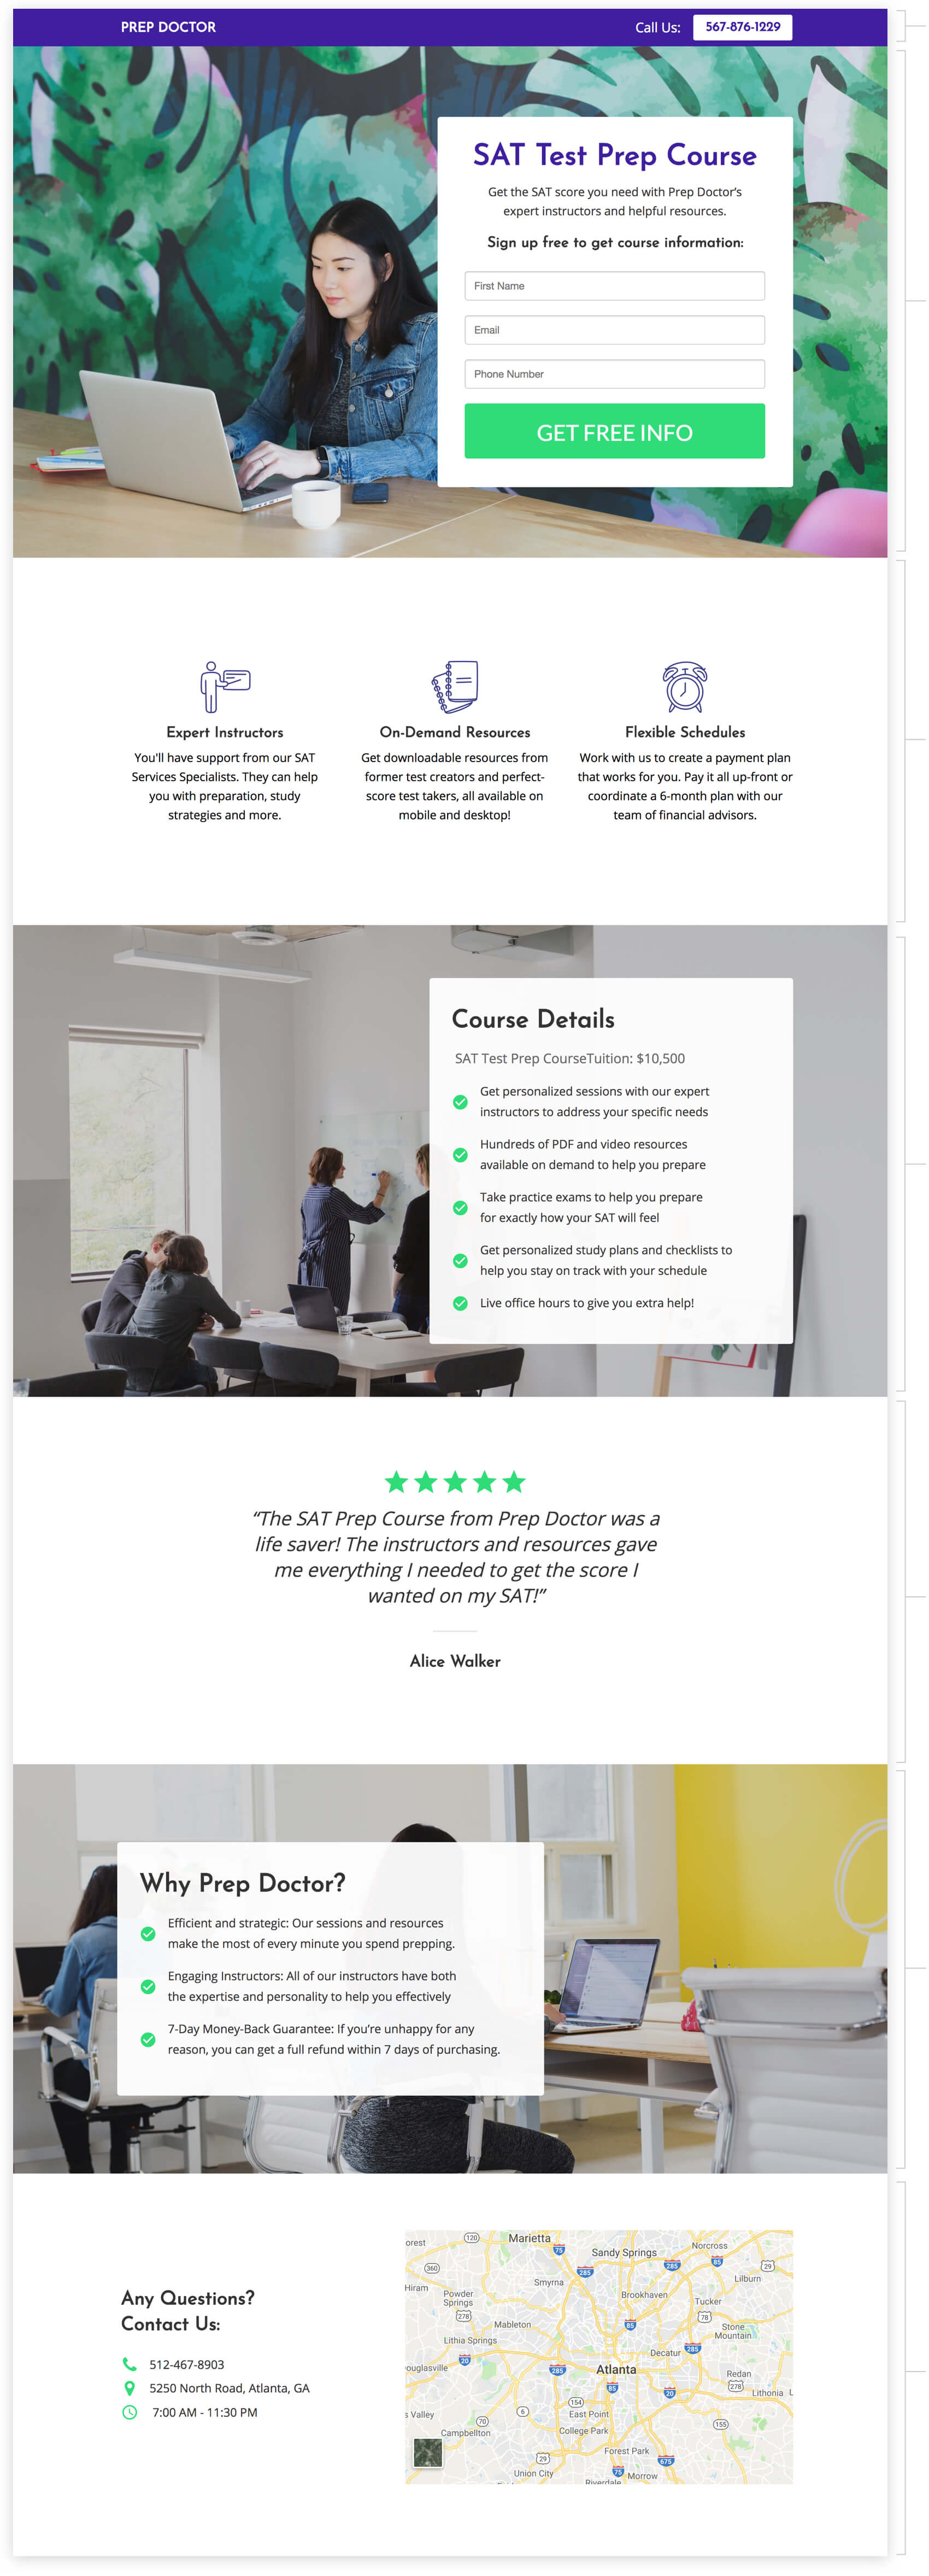 Request Information on a Test Prep Course landing page